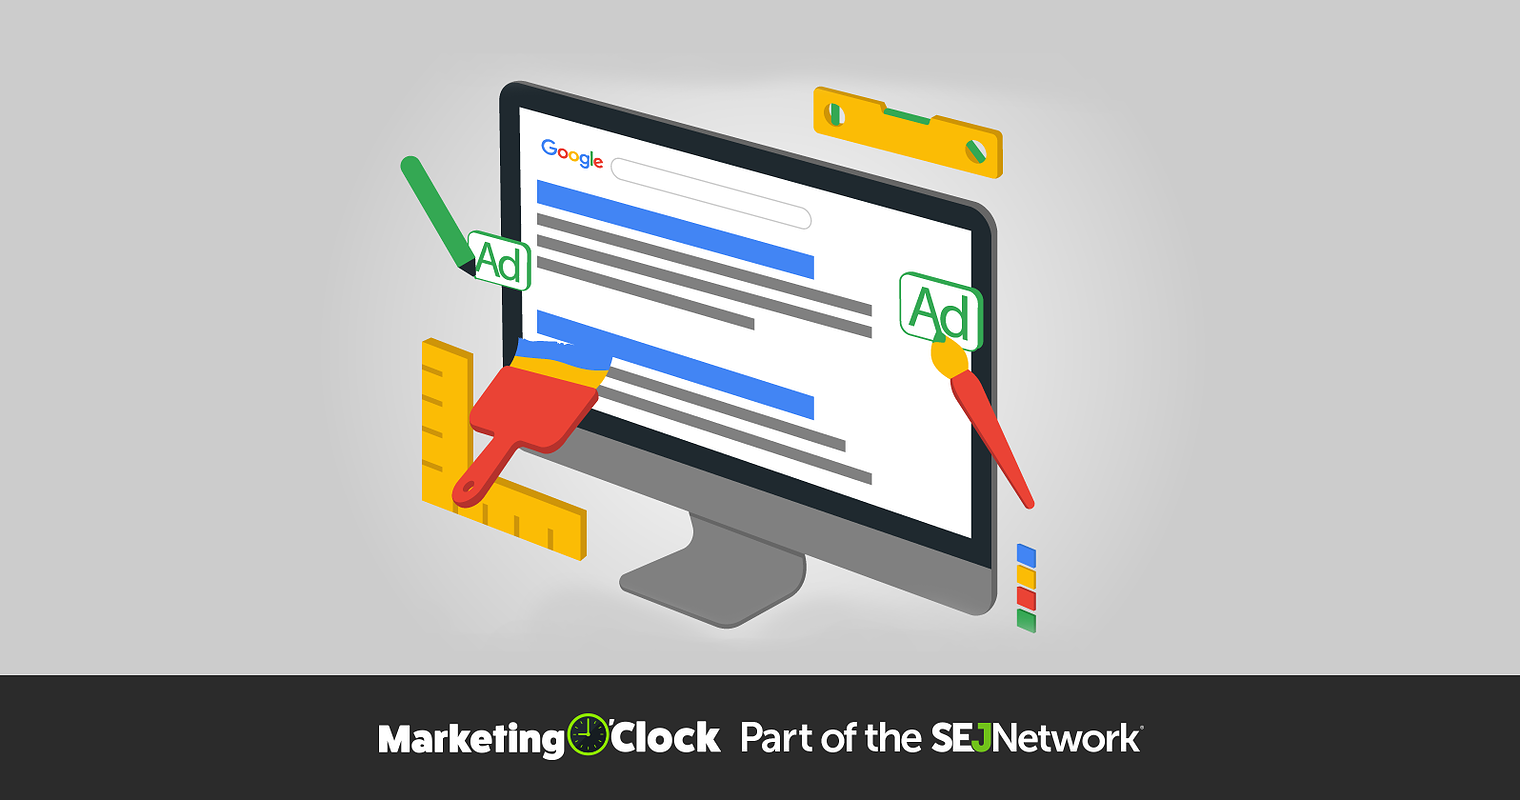 Google’s Desktop Search Results Get a New Look & This Week’s Digital Marketing News [PODCAST]